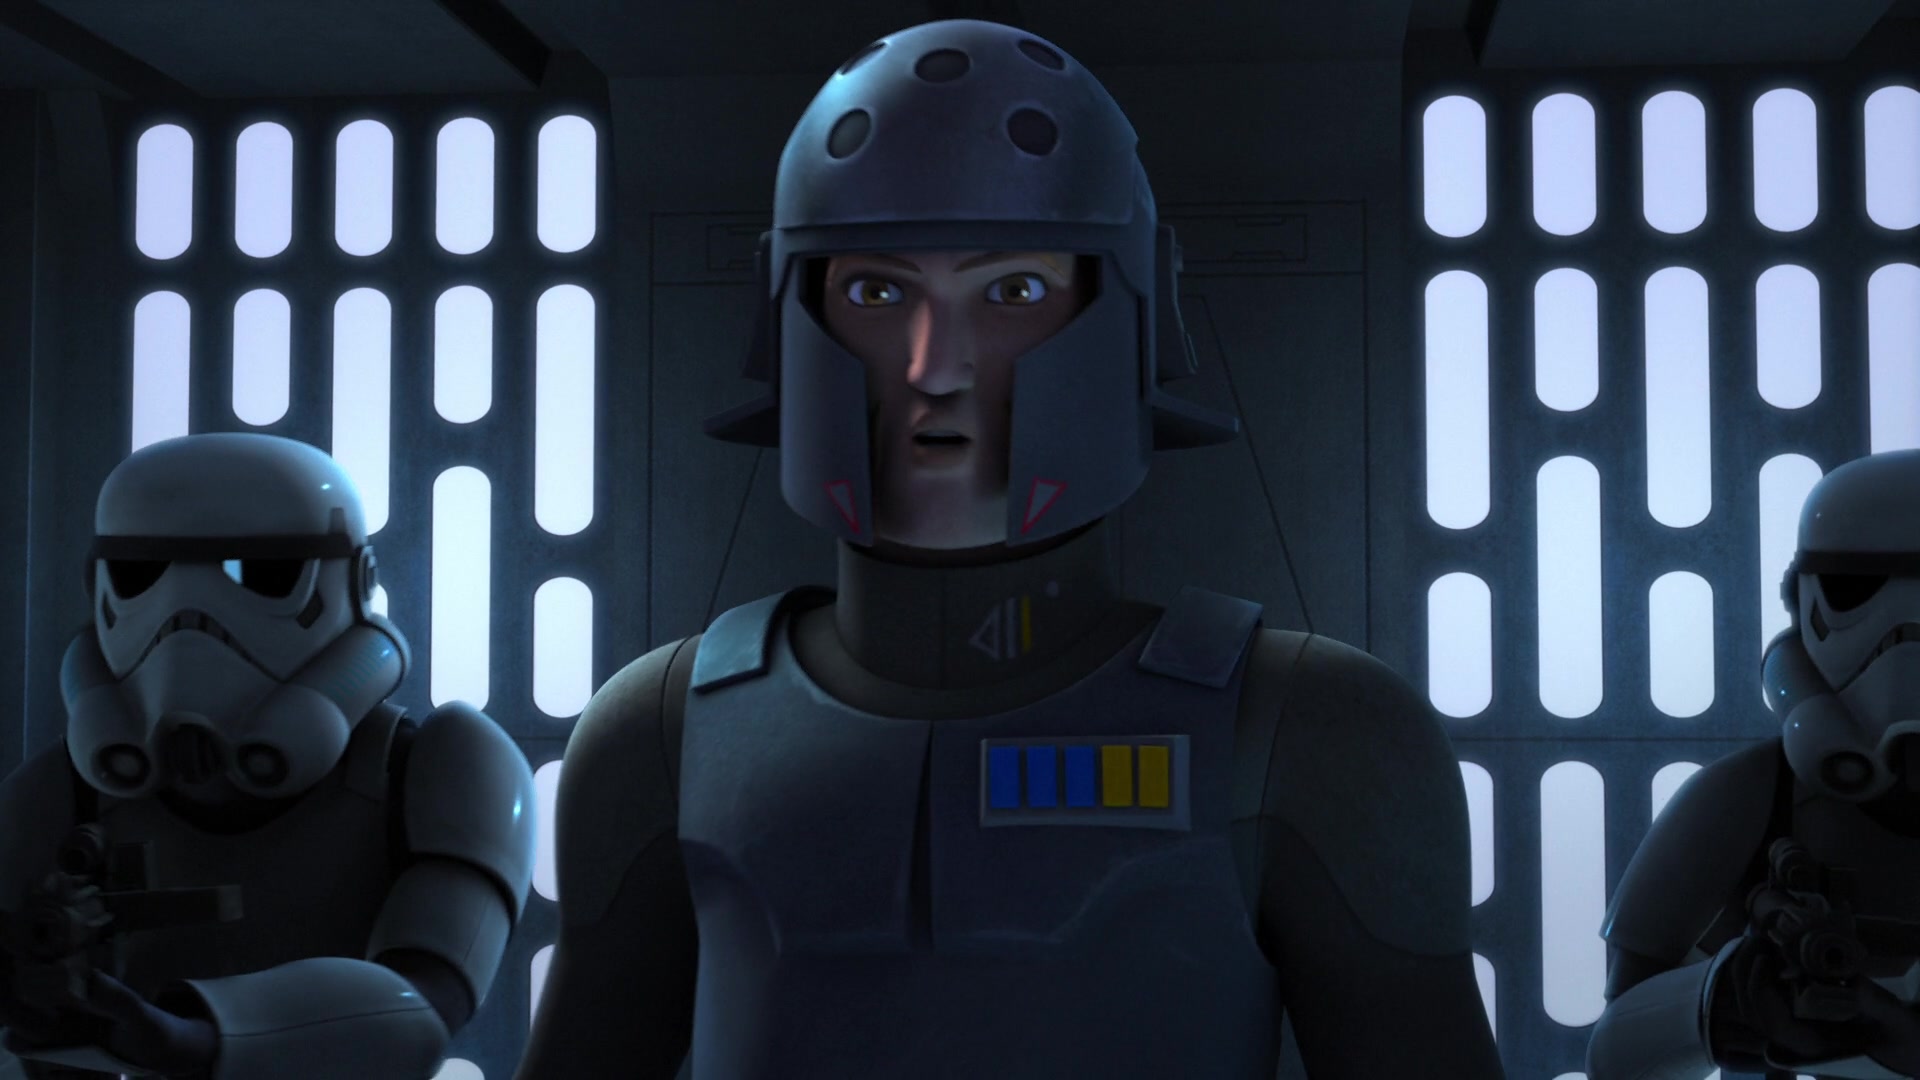 Agent Kallus (David Oyelowo) ambushes the crew of the Ghost in Star Wars Rebels Season 2 Episode 17 "The Honorable Ones" (2016), Lucasfilm